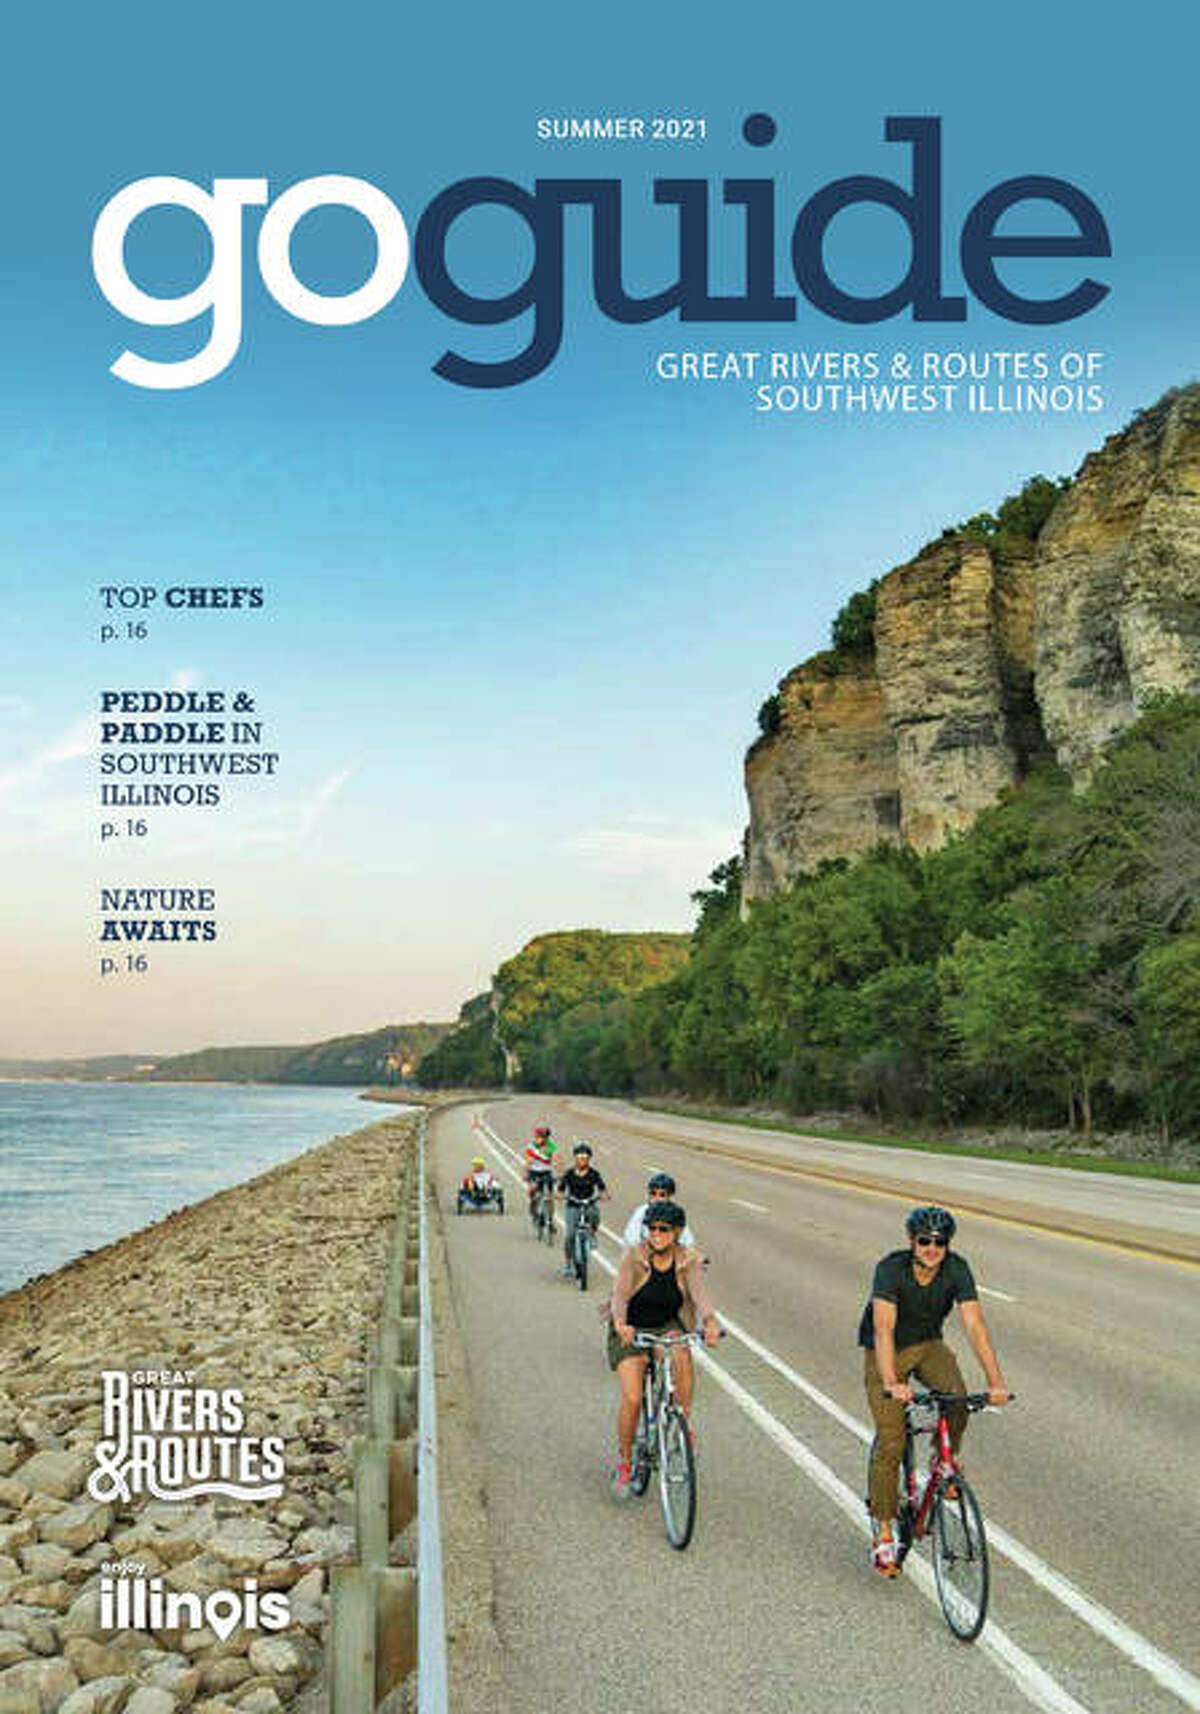 The the Great Rivers & Routes Tourism Bureau’s new Go Guide magazine focusing on travel experiences in the six-county region is now available online and area businesses.